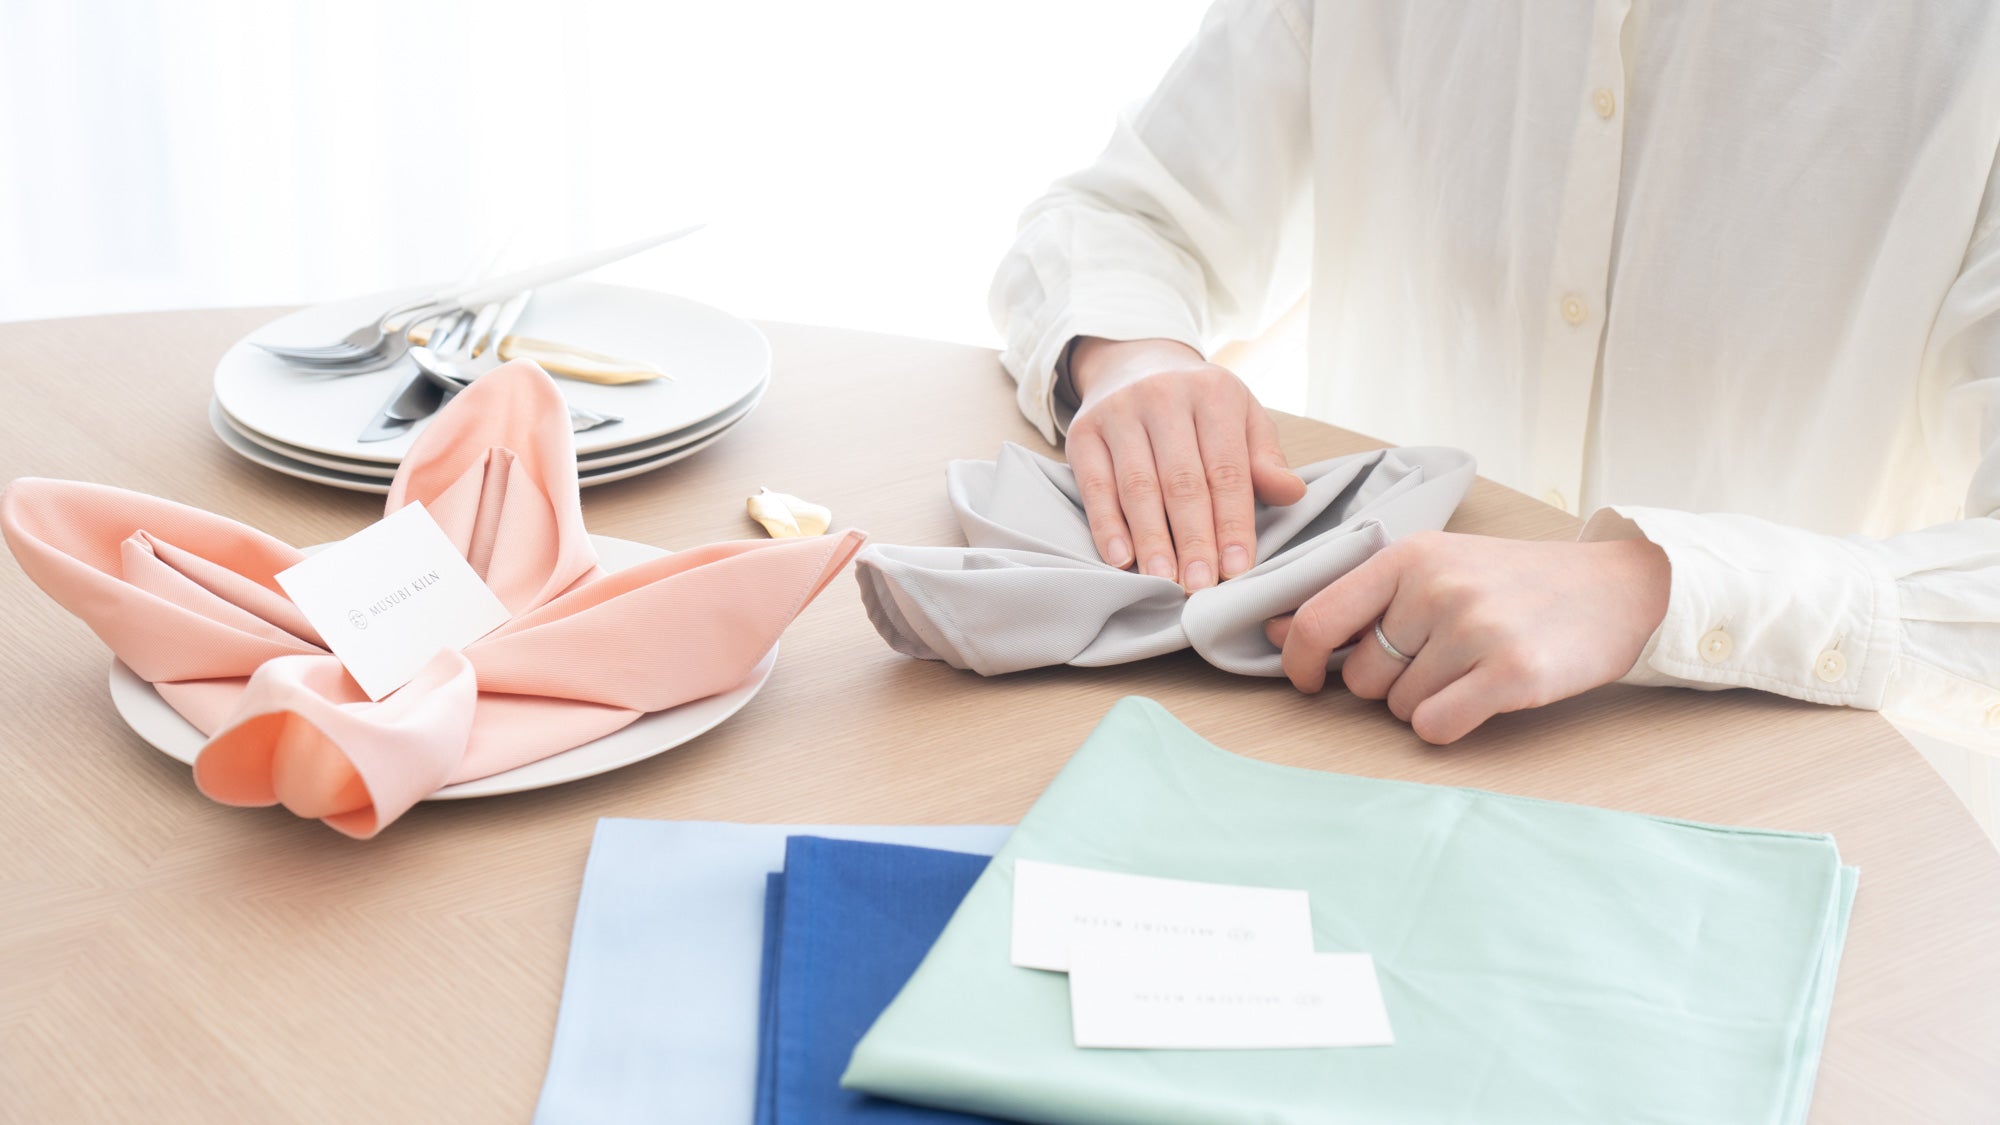 4 Napkin Folding Ideas to Spruce up Your Restaurant's Tables